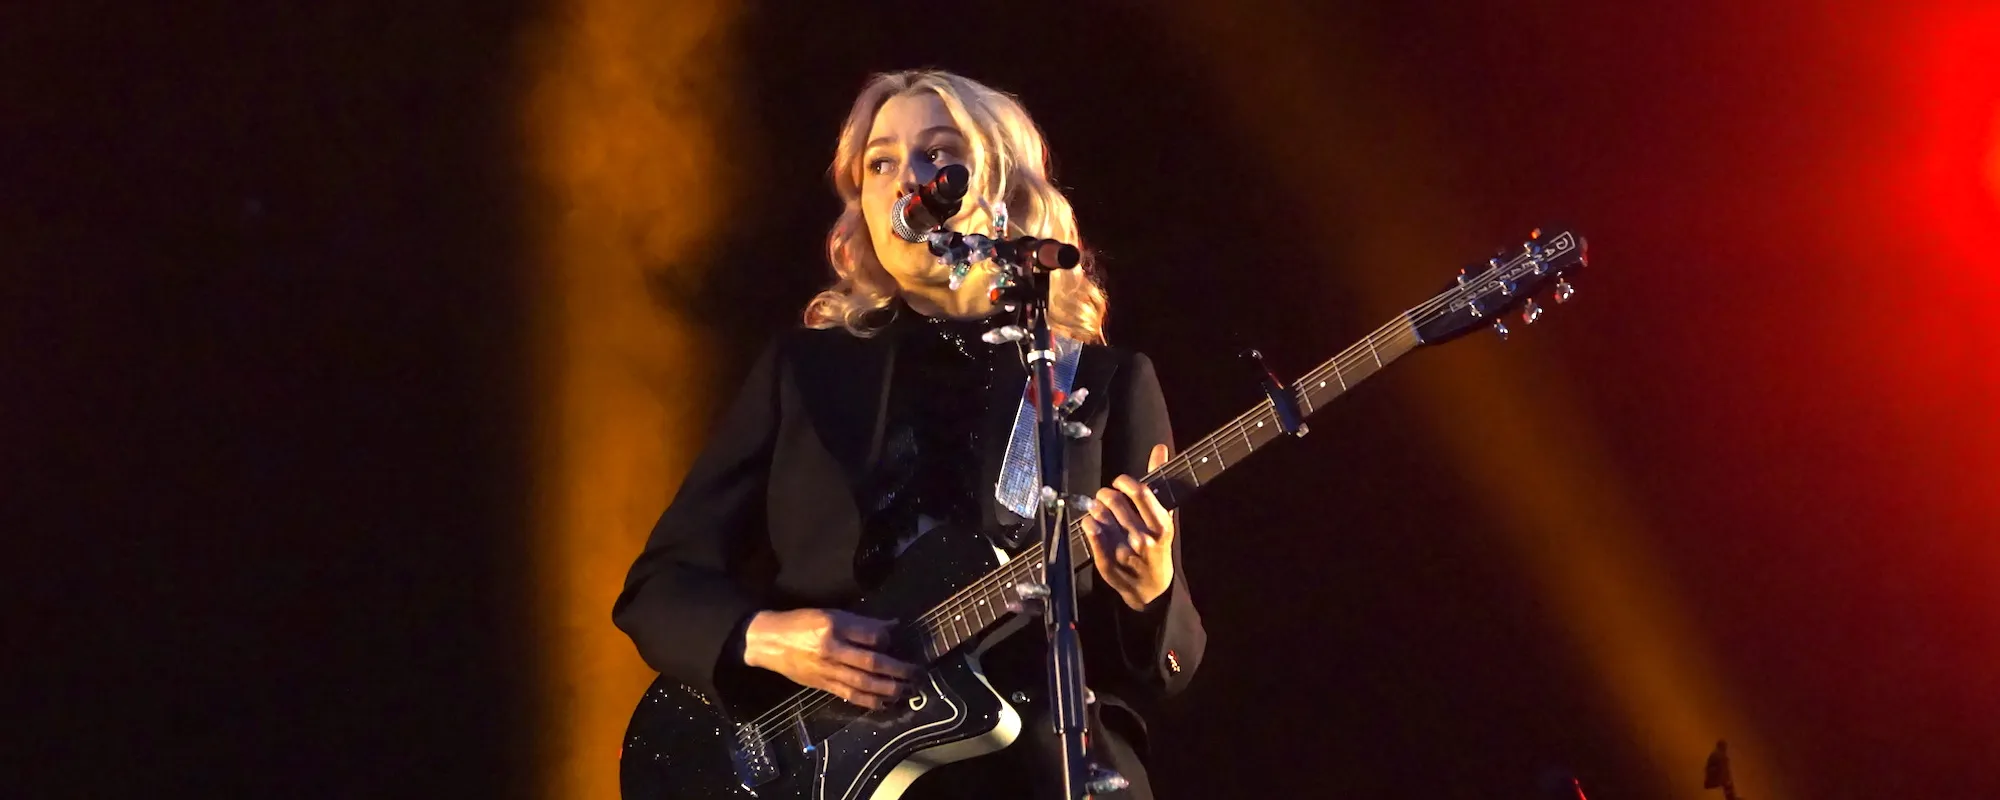 Phoebe Bridgers, Limp Bizkit’s Fred Durst and Others Set to Star in New Horror Film